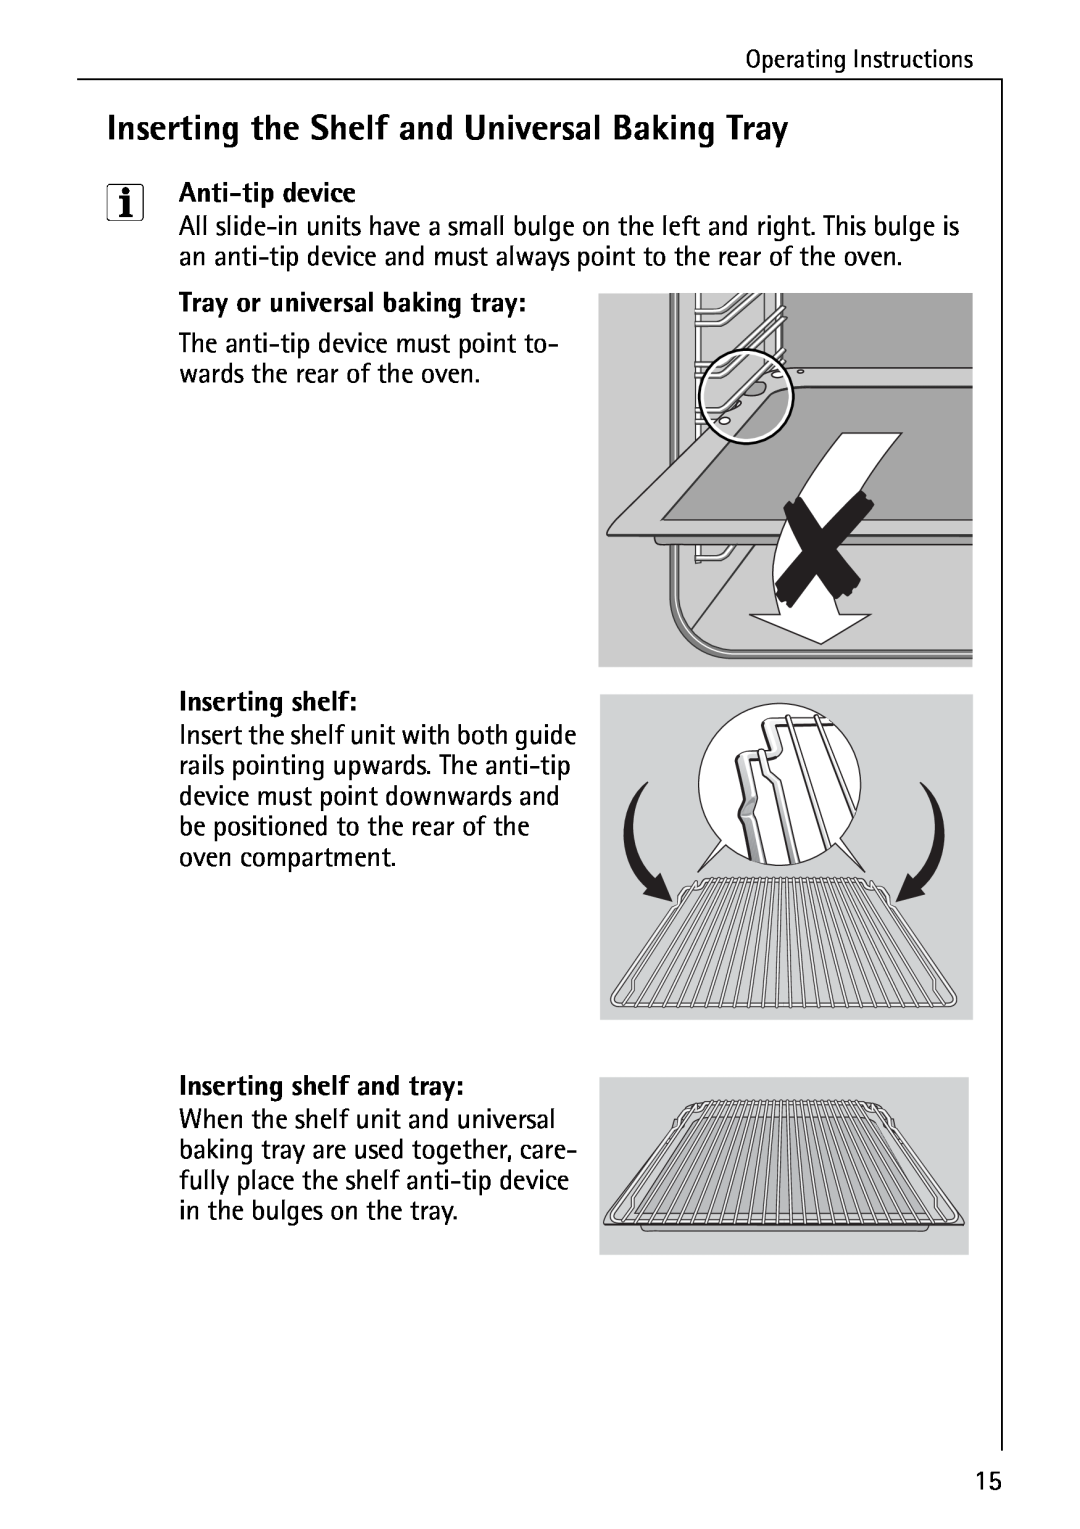 Electrolux B2190-1 manual Inserting the Shelf and Universal Baking Tray, Anti-tip device, Tray or universal baking tray 